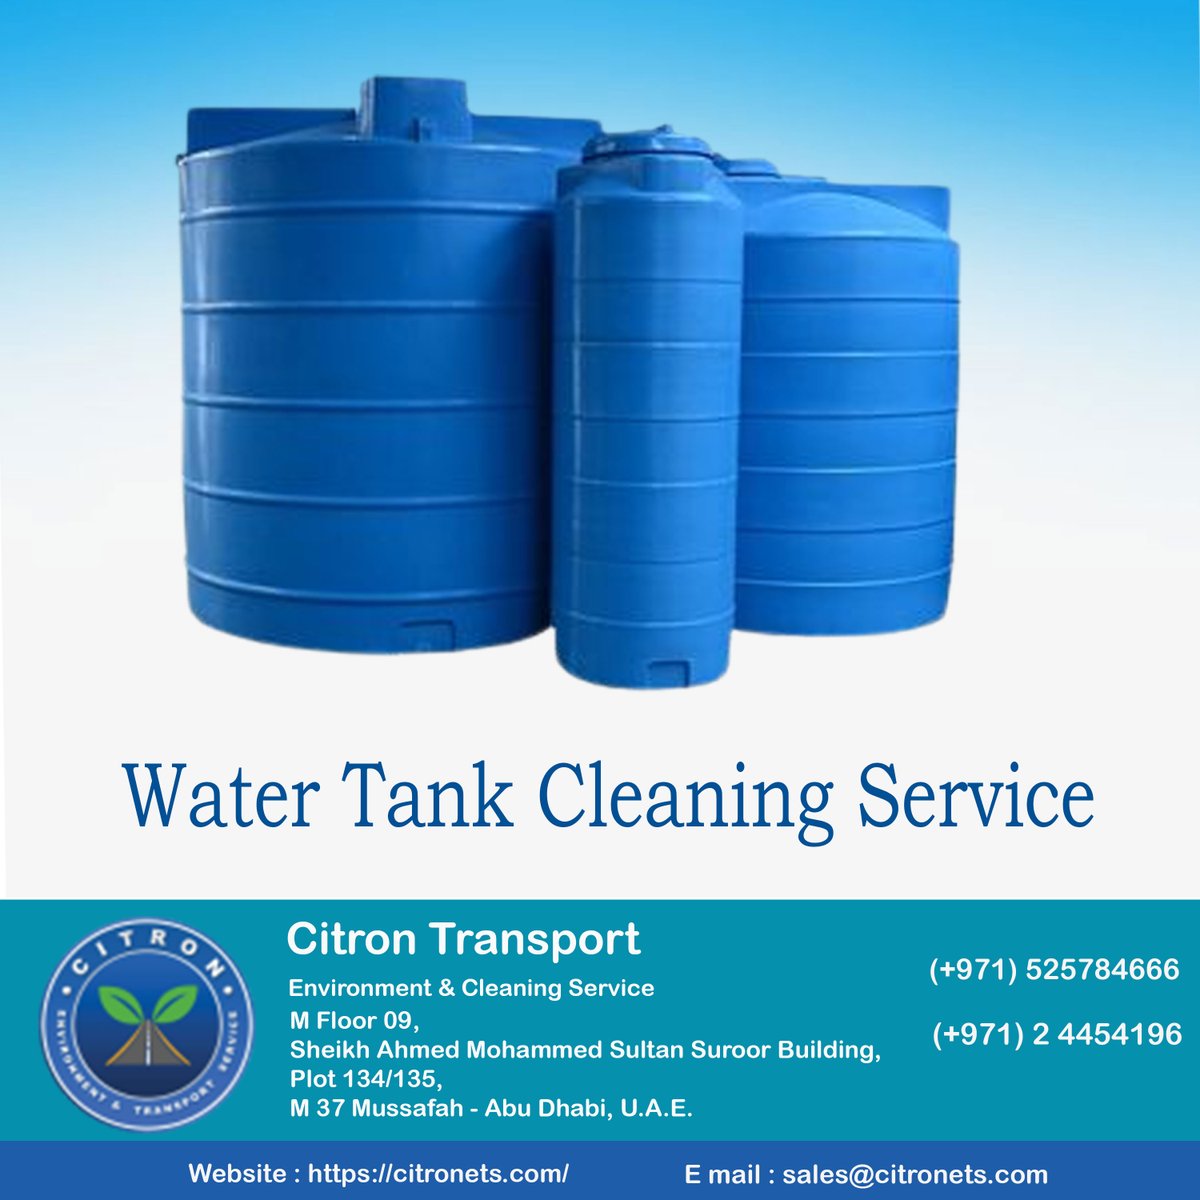 Cleaning and sanitizing water tanks make sure that a tank is disinfected, it is safe and safe to drink.
(+971) 525784666
sales@citronets.com
citronets.com/water-tank-cle…
#watertankcleaning #watertankcleaningservice #abudhabi #cleaningservice #disinfectioncleaning #cleaningwatertank